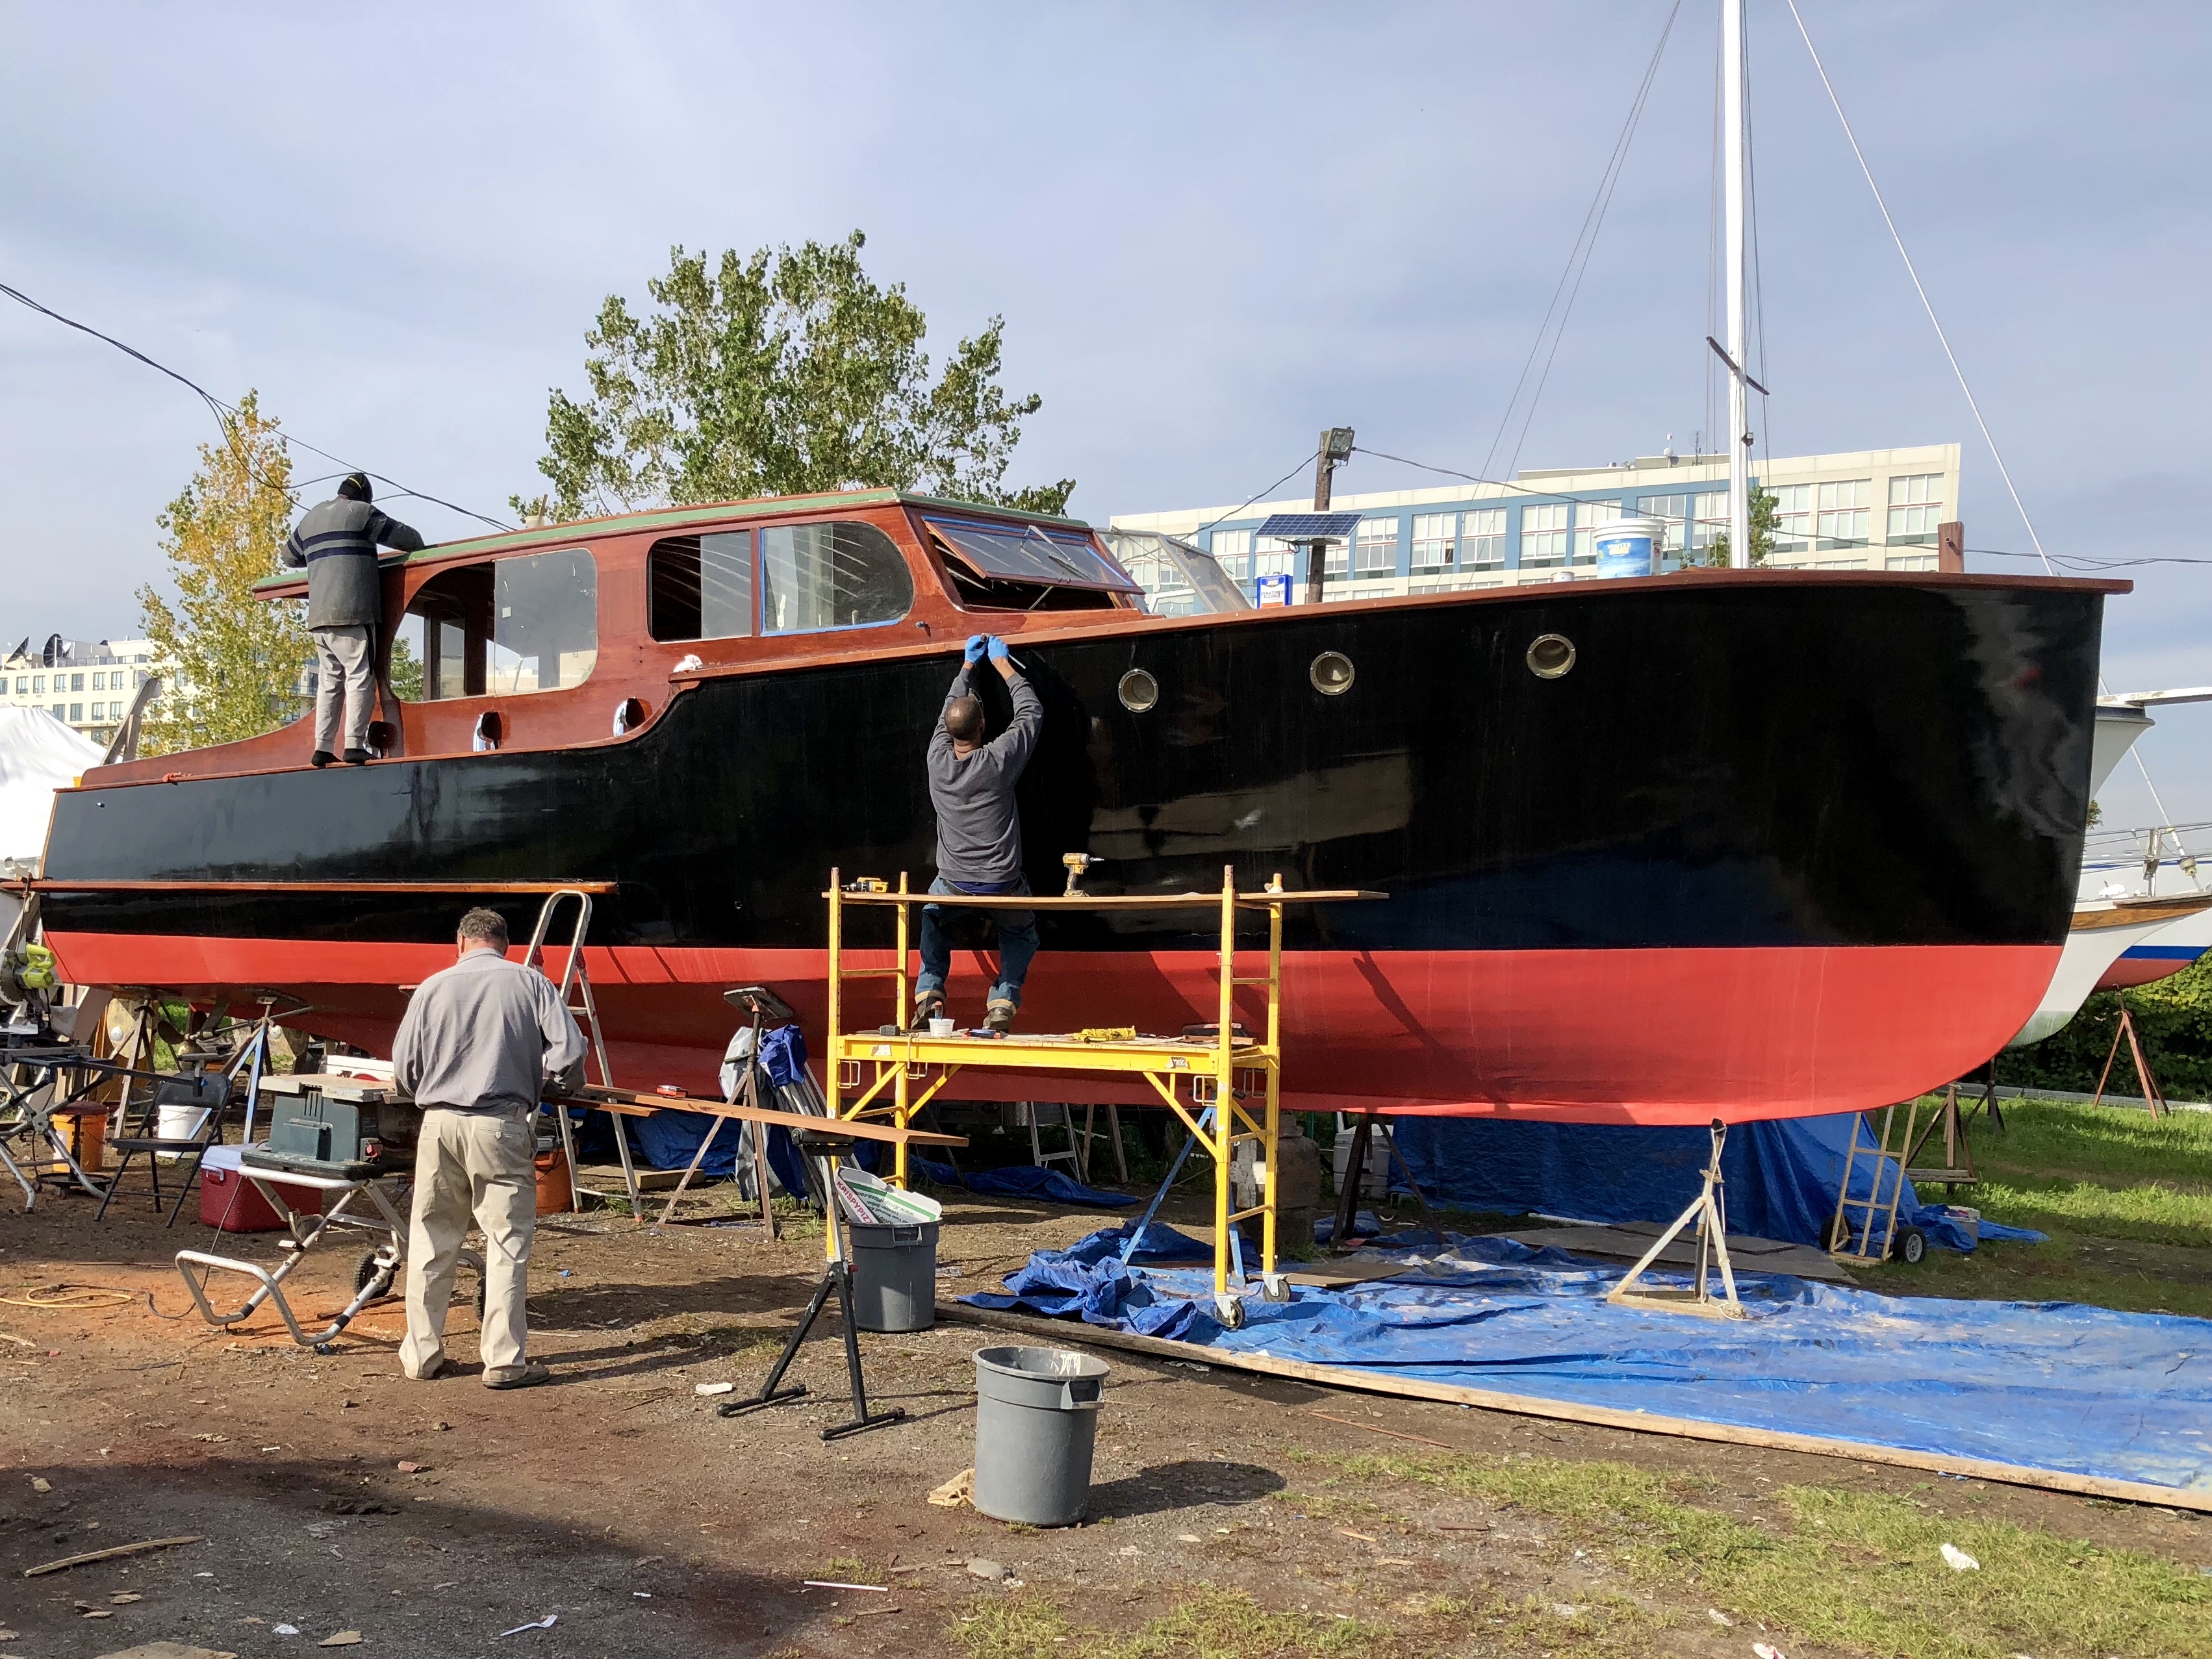 The wooden vessel in the final stages of a lengthy restoration project.